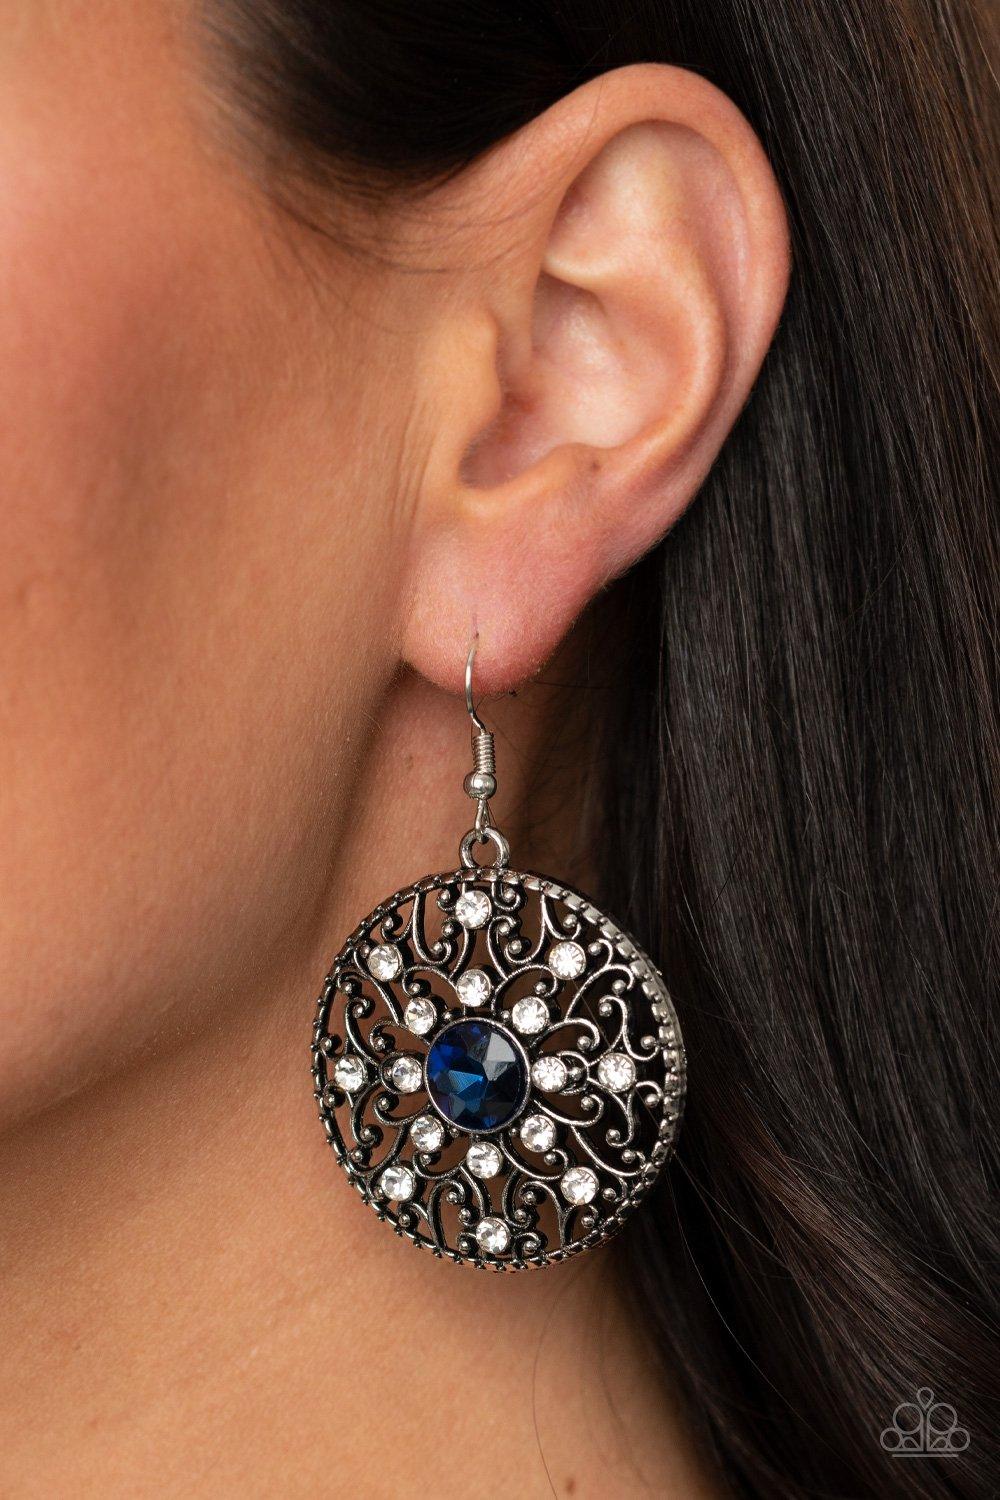 Paparazzi Accessories-GLOW Your True Colors - Blue Earrings